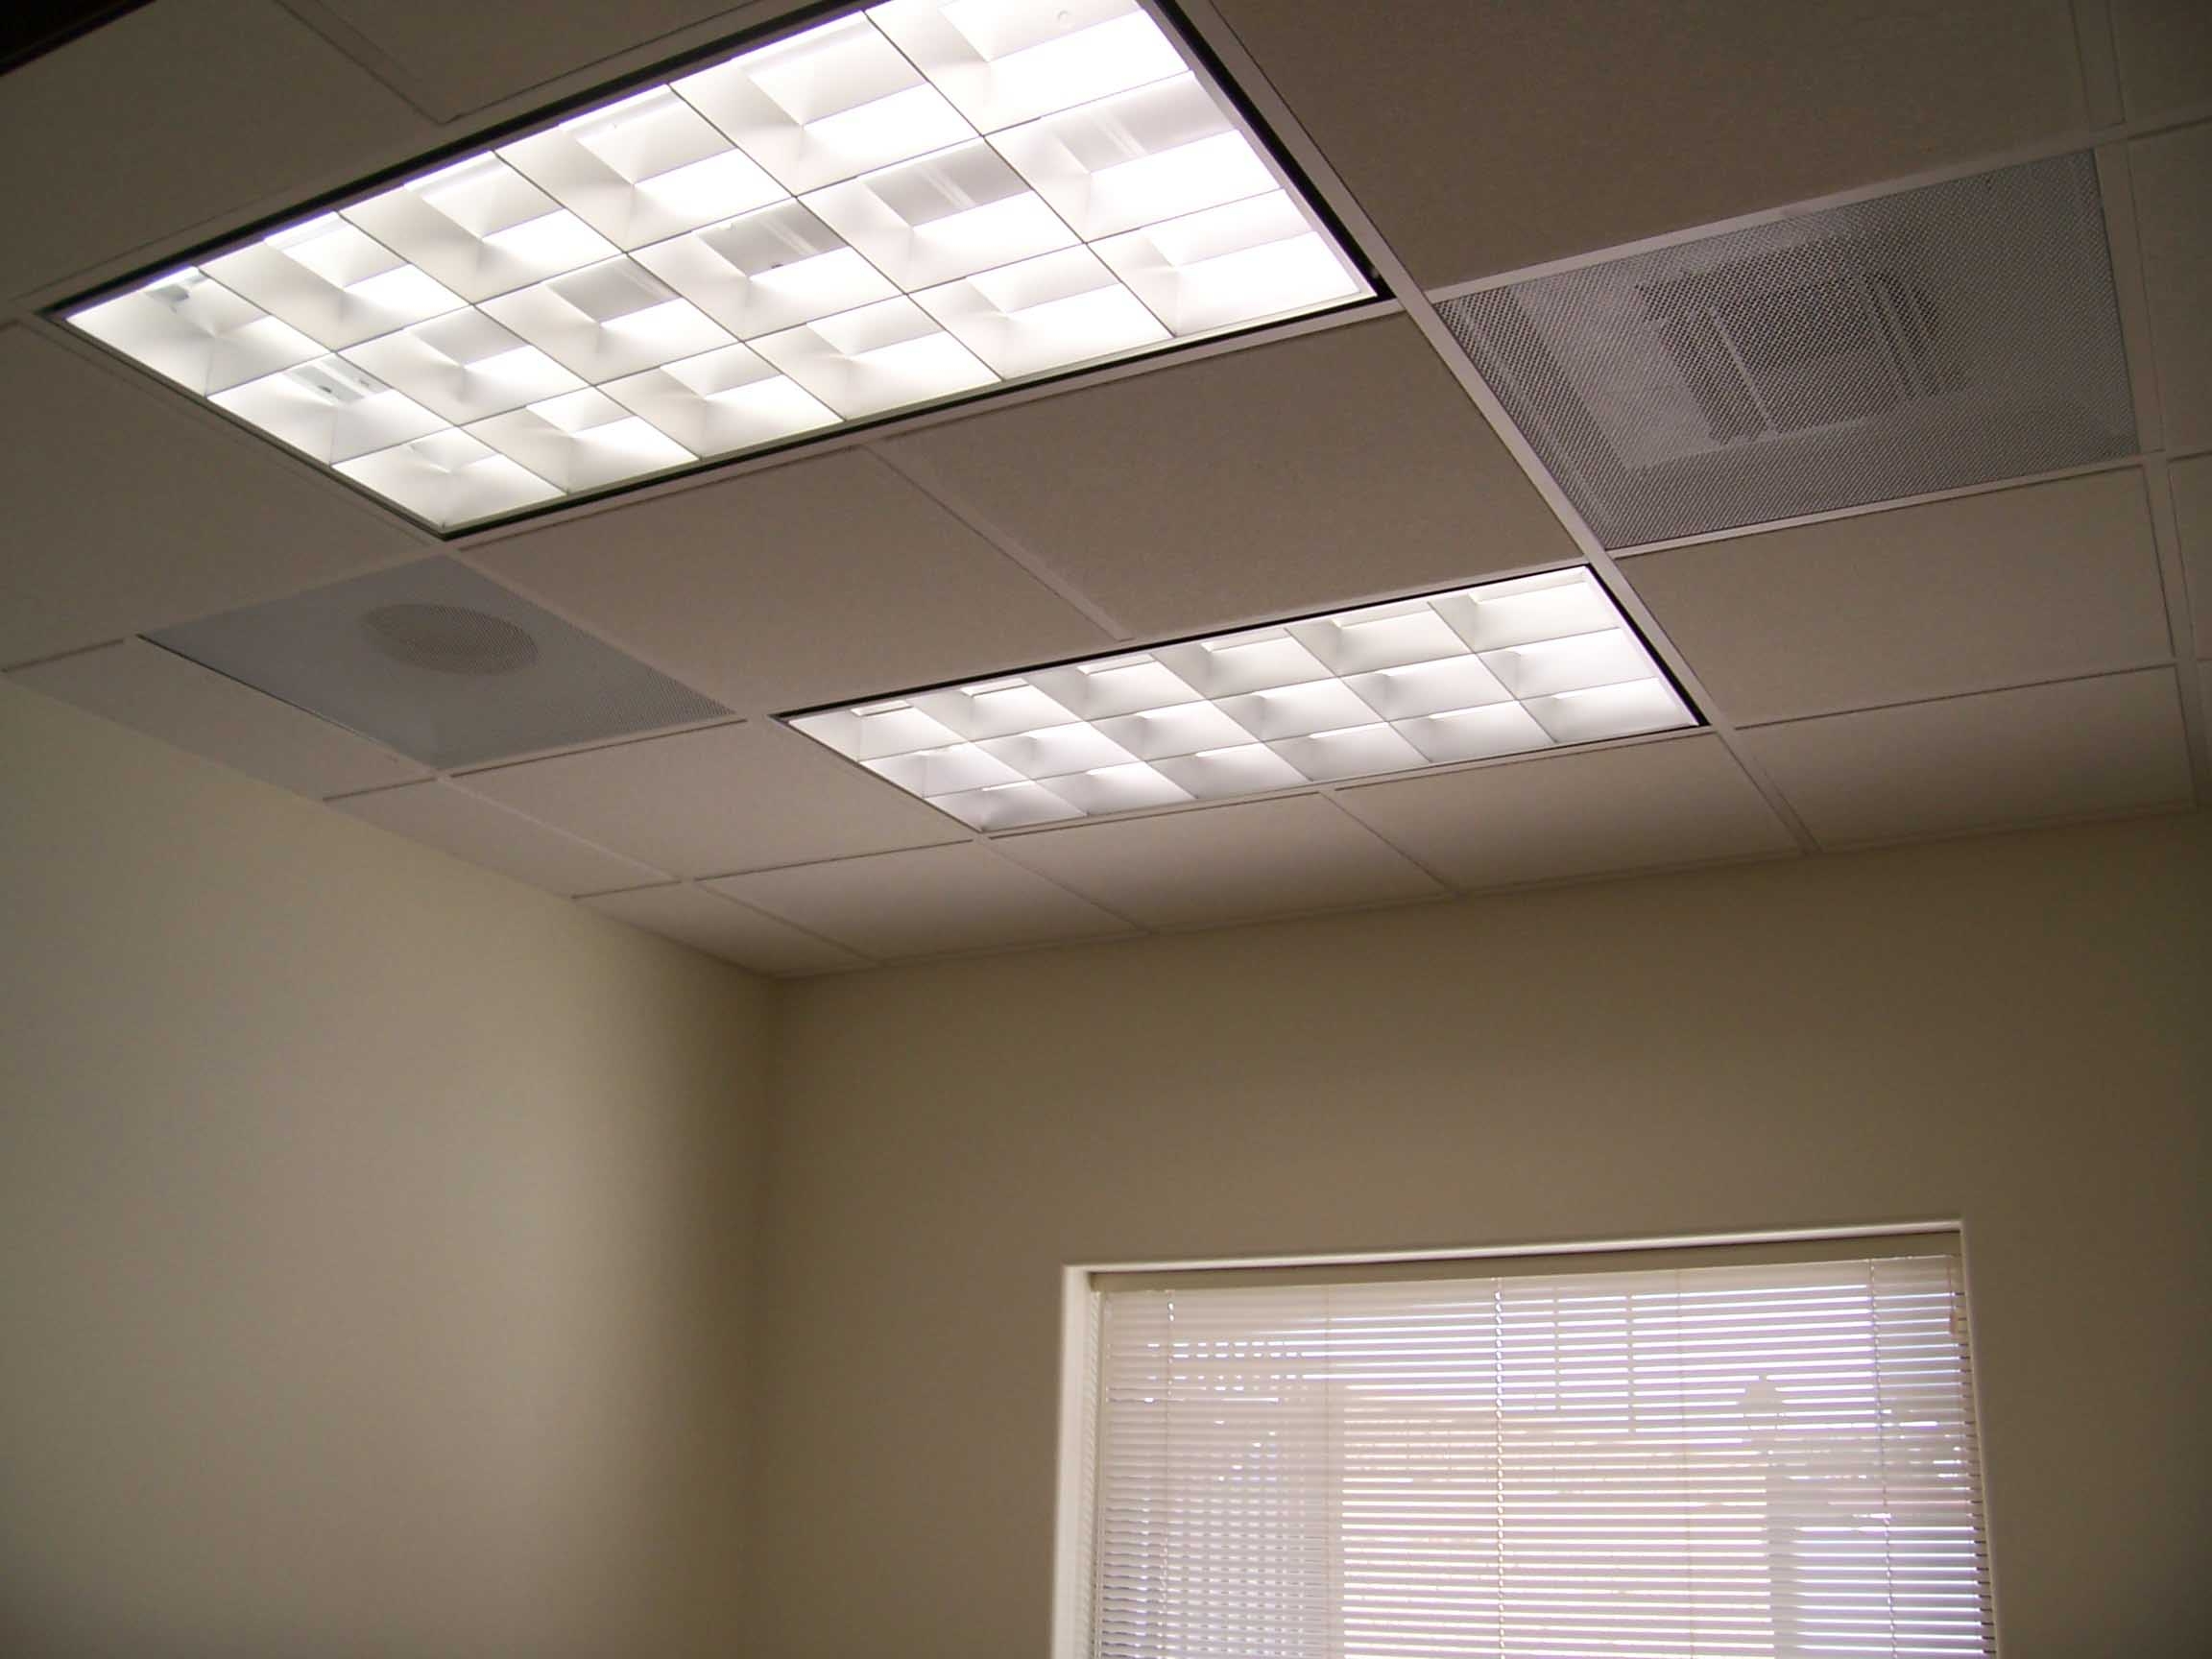 Fluorescent Ceiling Lights For Kitchens2304 X 1728